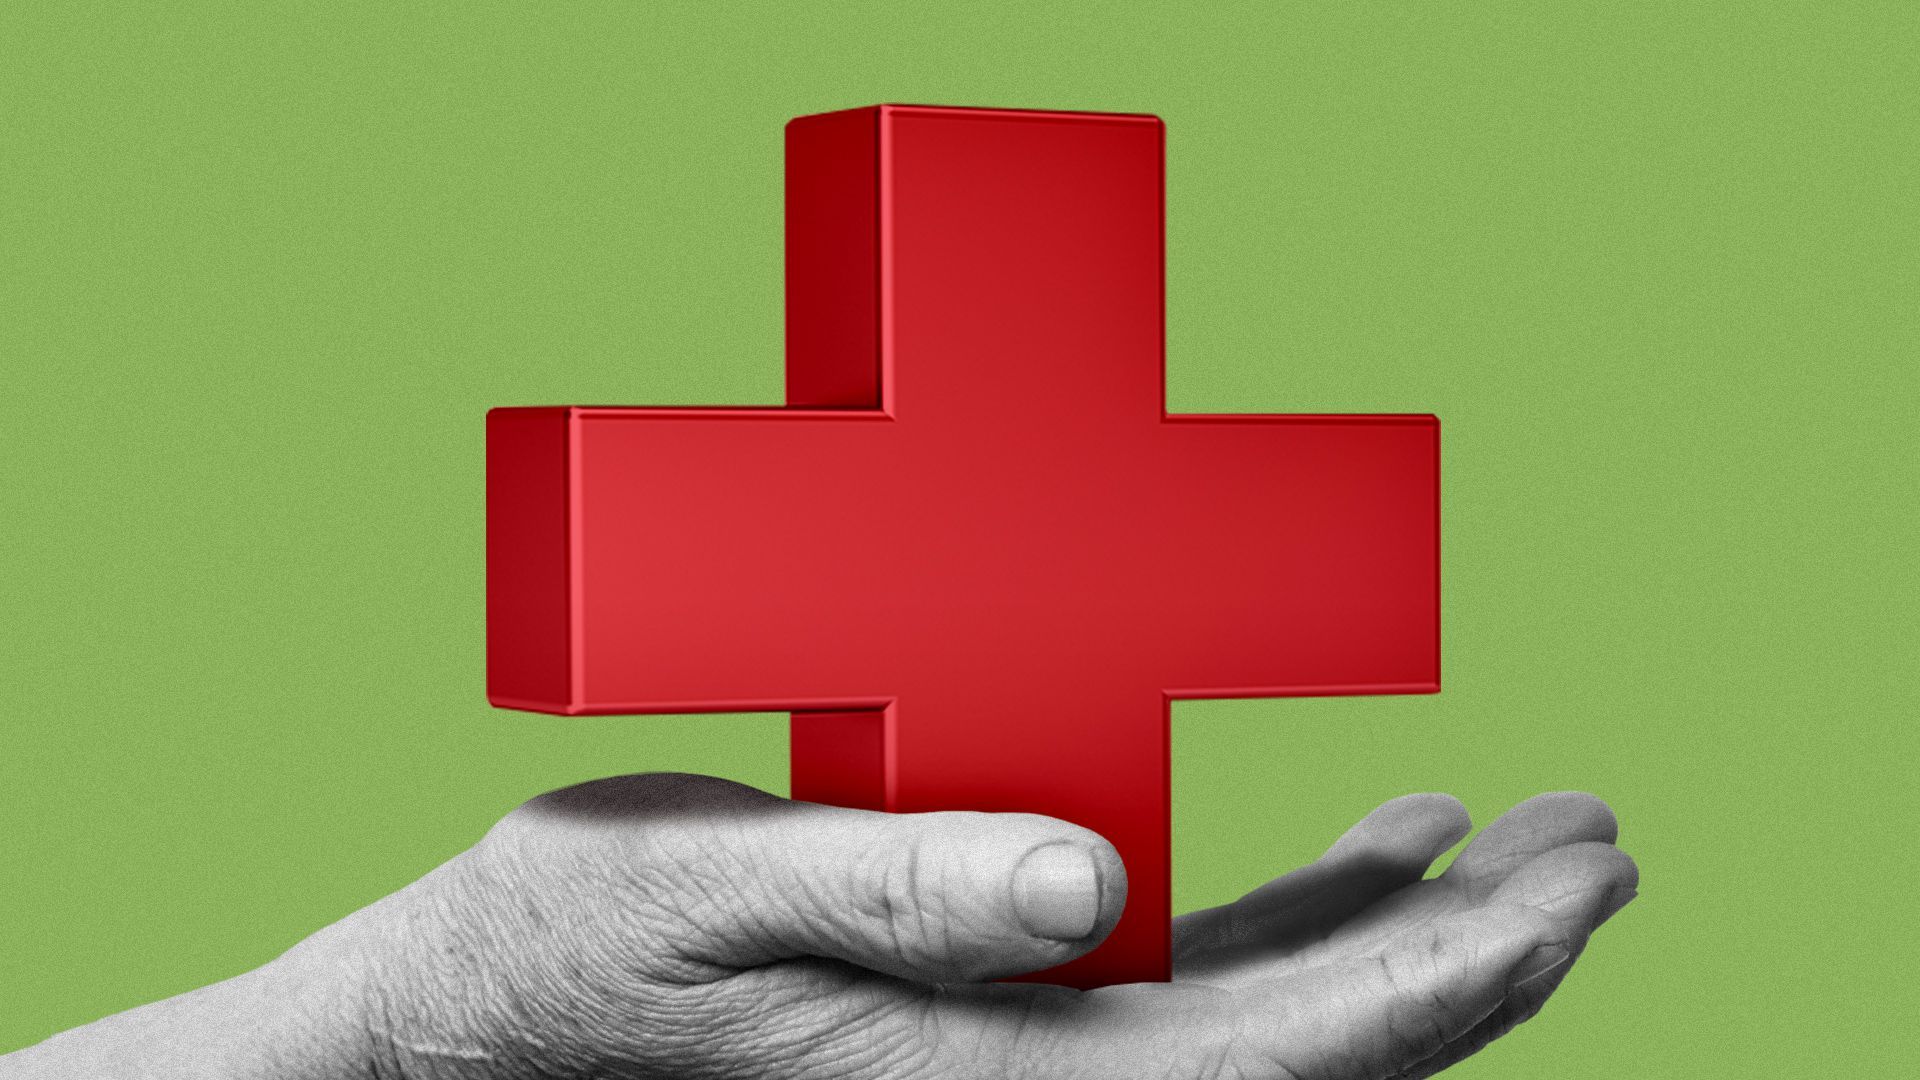 Illustration of hand holding a red health plus.